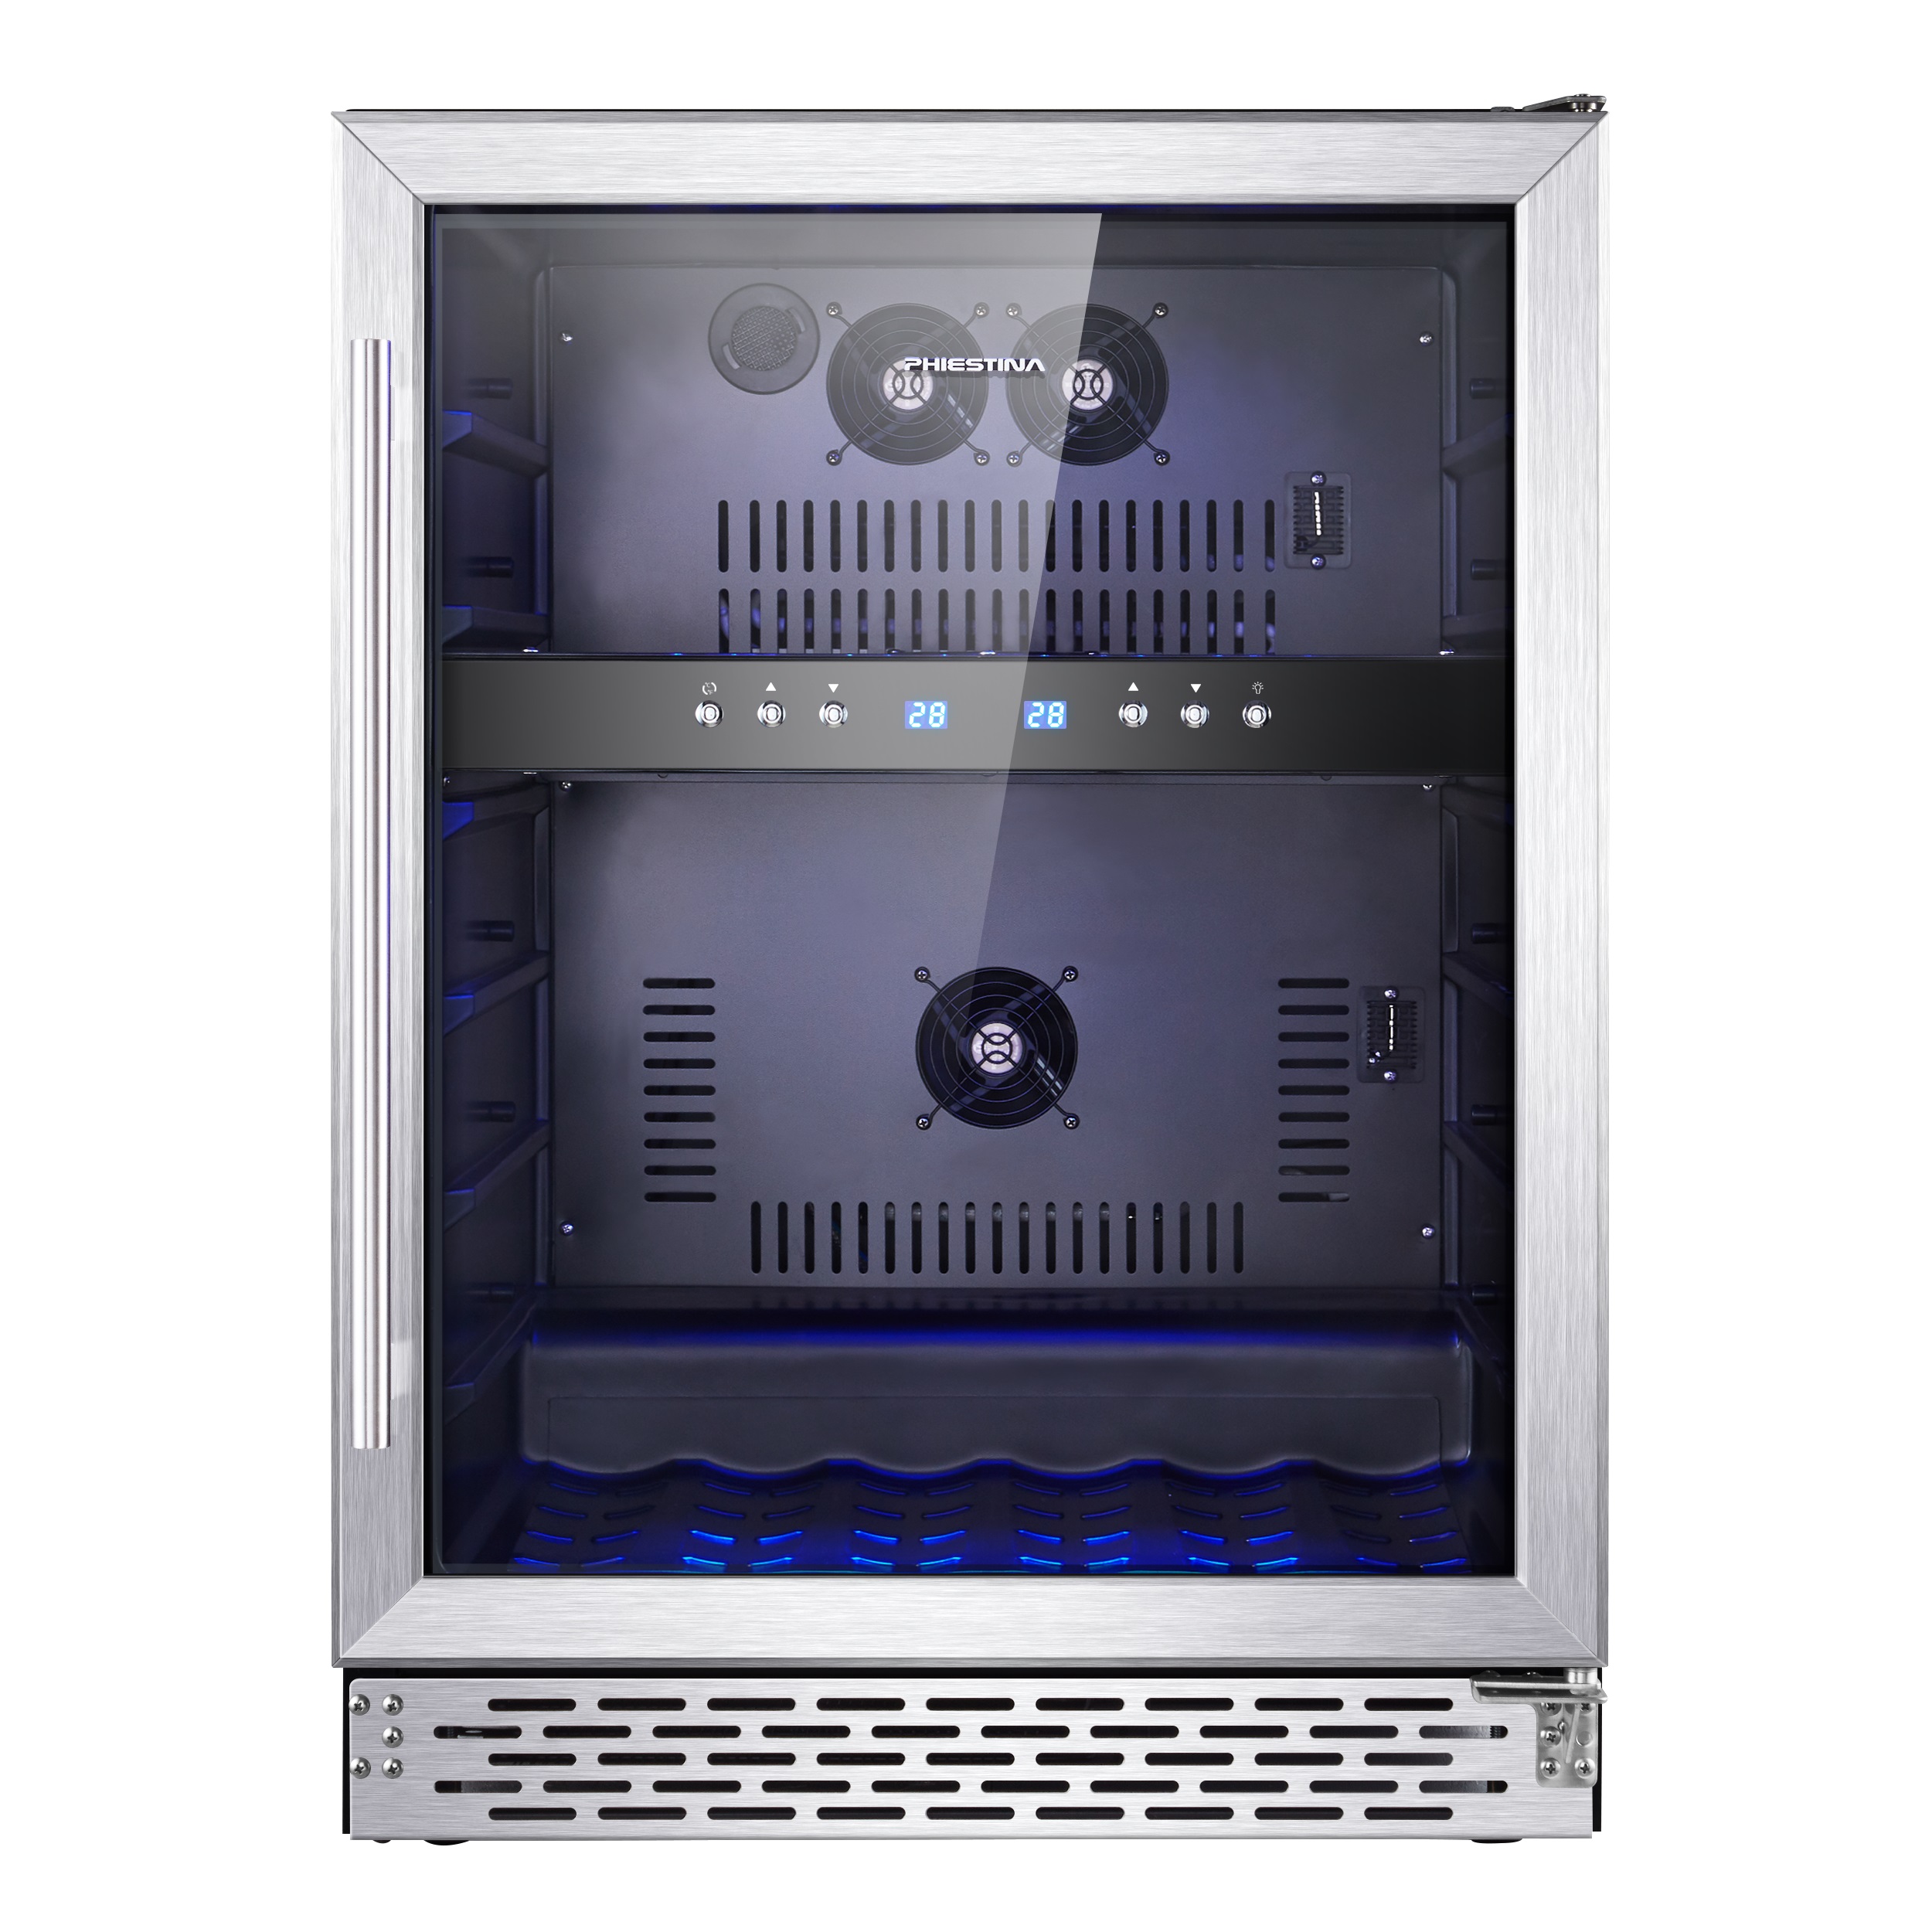 Phiestina 46 Bottle Dual Zone Built-in Wine Cooler - image 2 of 12